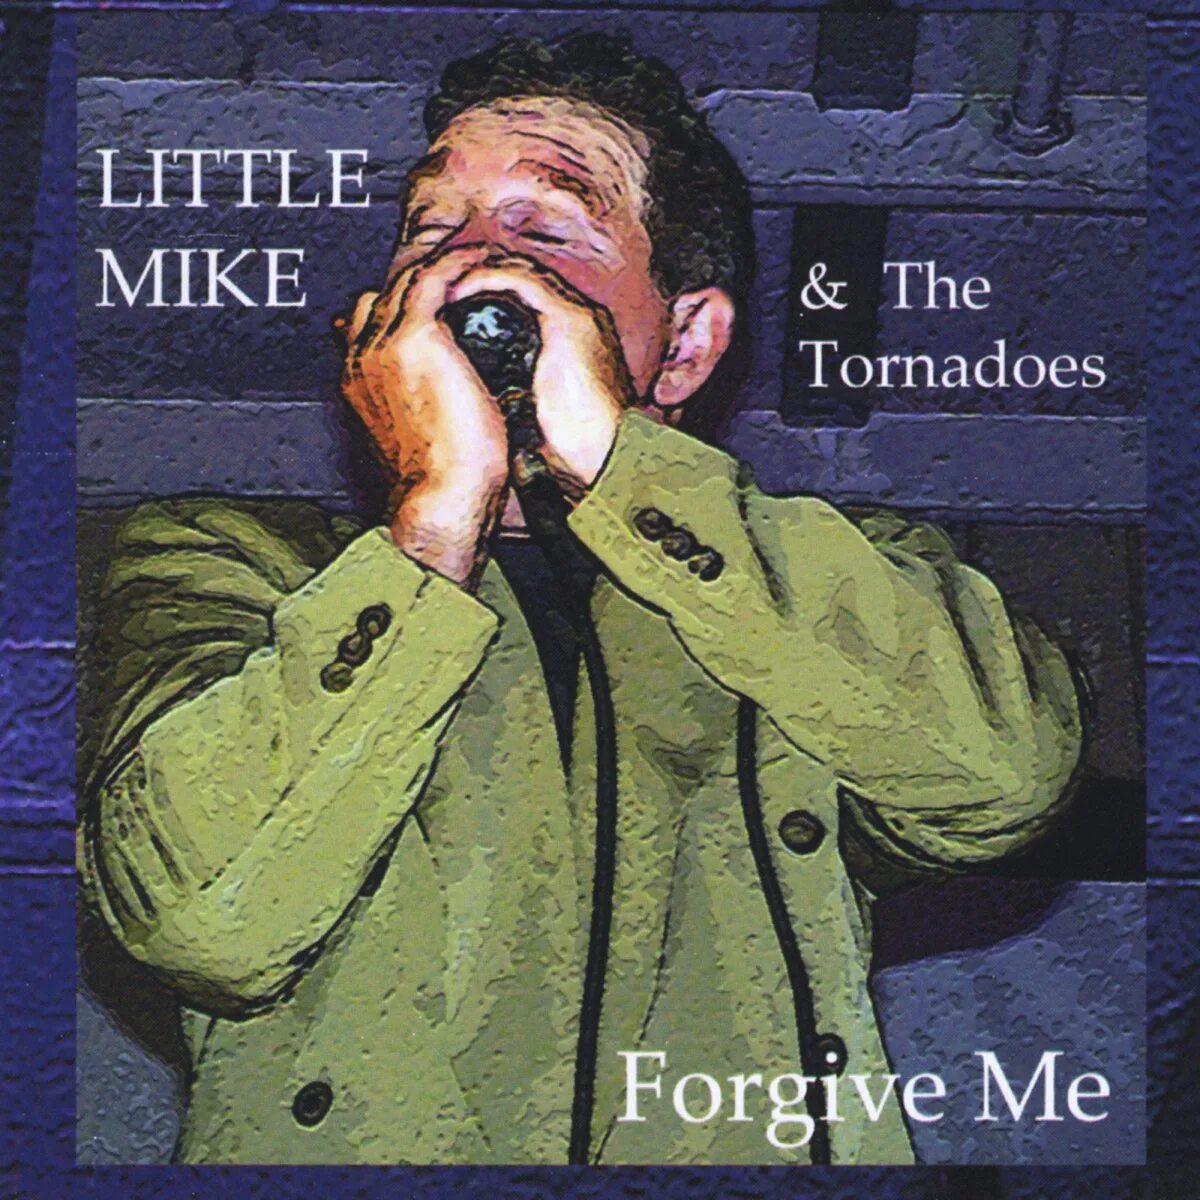 Mike little. Little Mike the Tornadoes. Little Mike & the Tornadoes Cover. Mikey Tornado. Little Mike character.